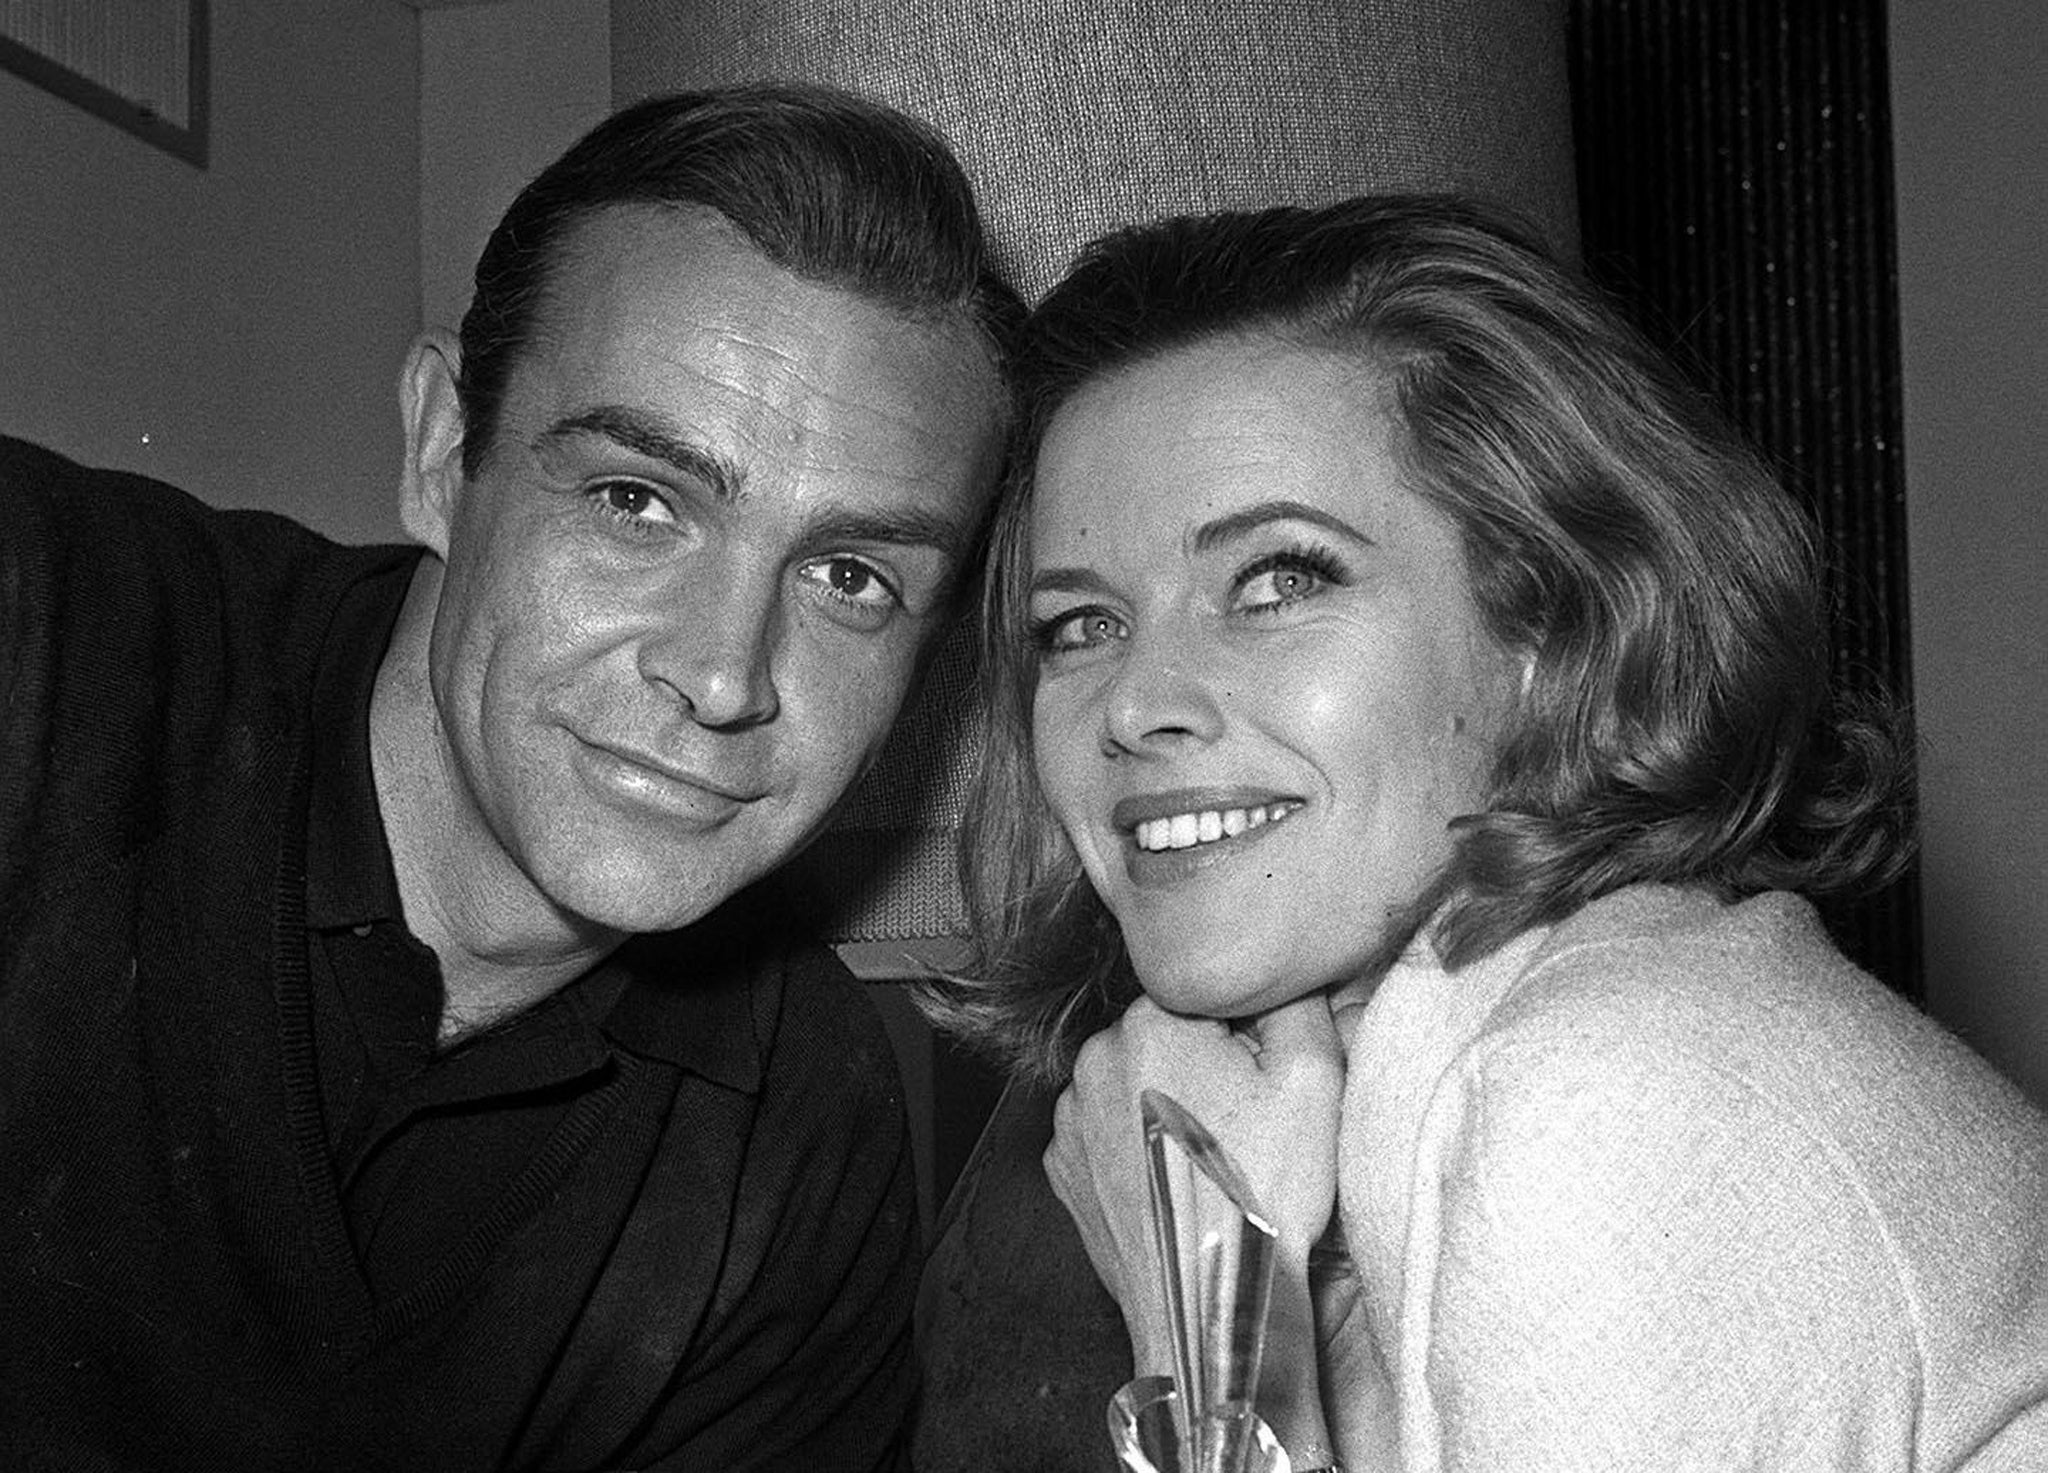 Sean Connery (left) and Honor Blackman before filming of the third Bond movie Goldfinger as James Bond and Pussy Galore